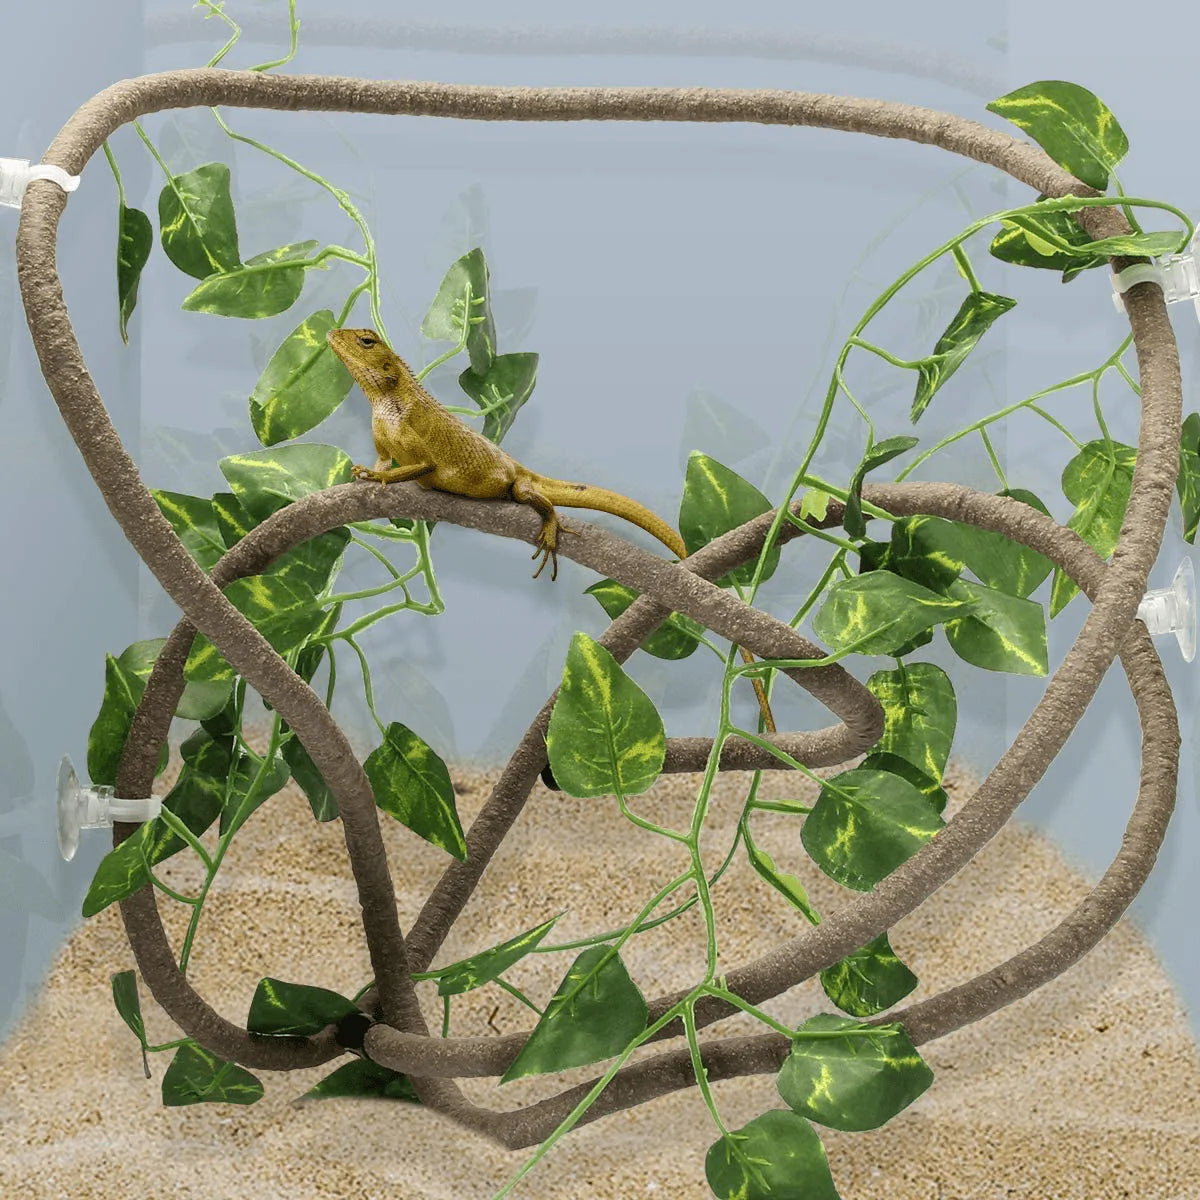 Bearded Dragon Tank Accessories, Coolrunner 8FT Reptile Vines, 6 FT Reptile Leaves and Lizard Hammock with Suction Cups for Lizards Snakes Gecko Iguana Chameleon Tortoise